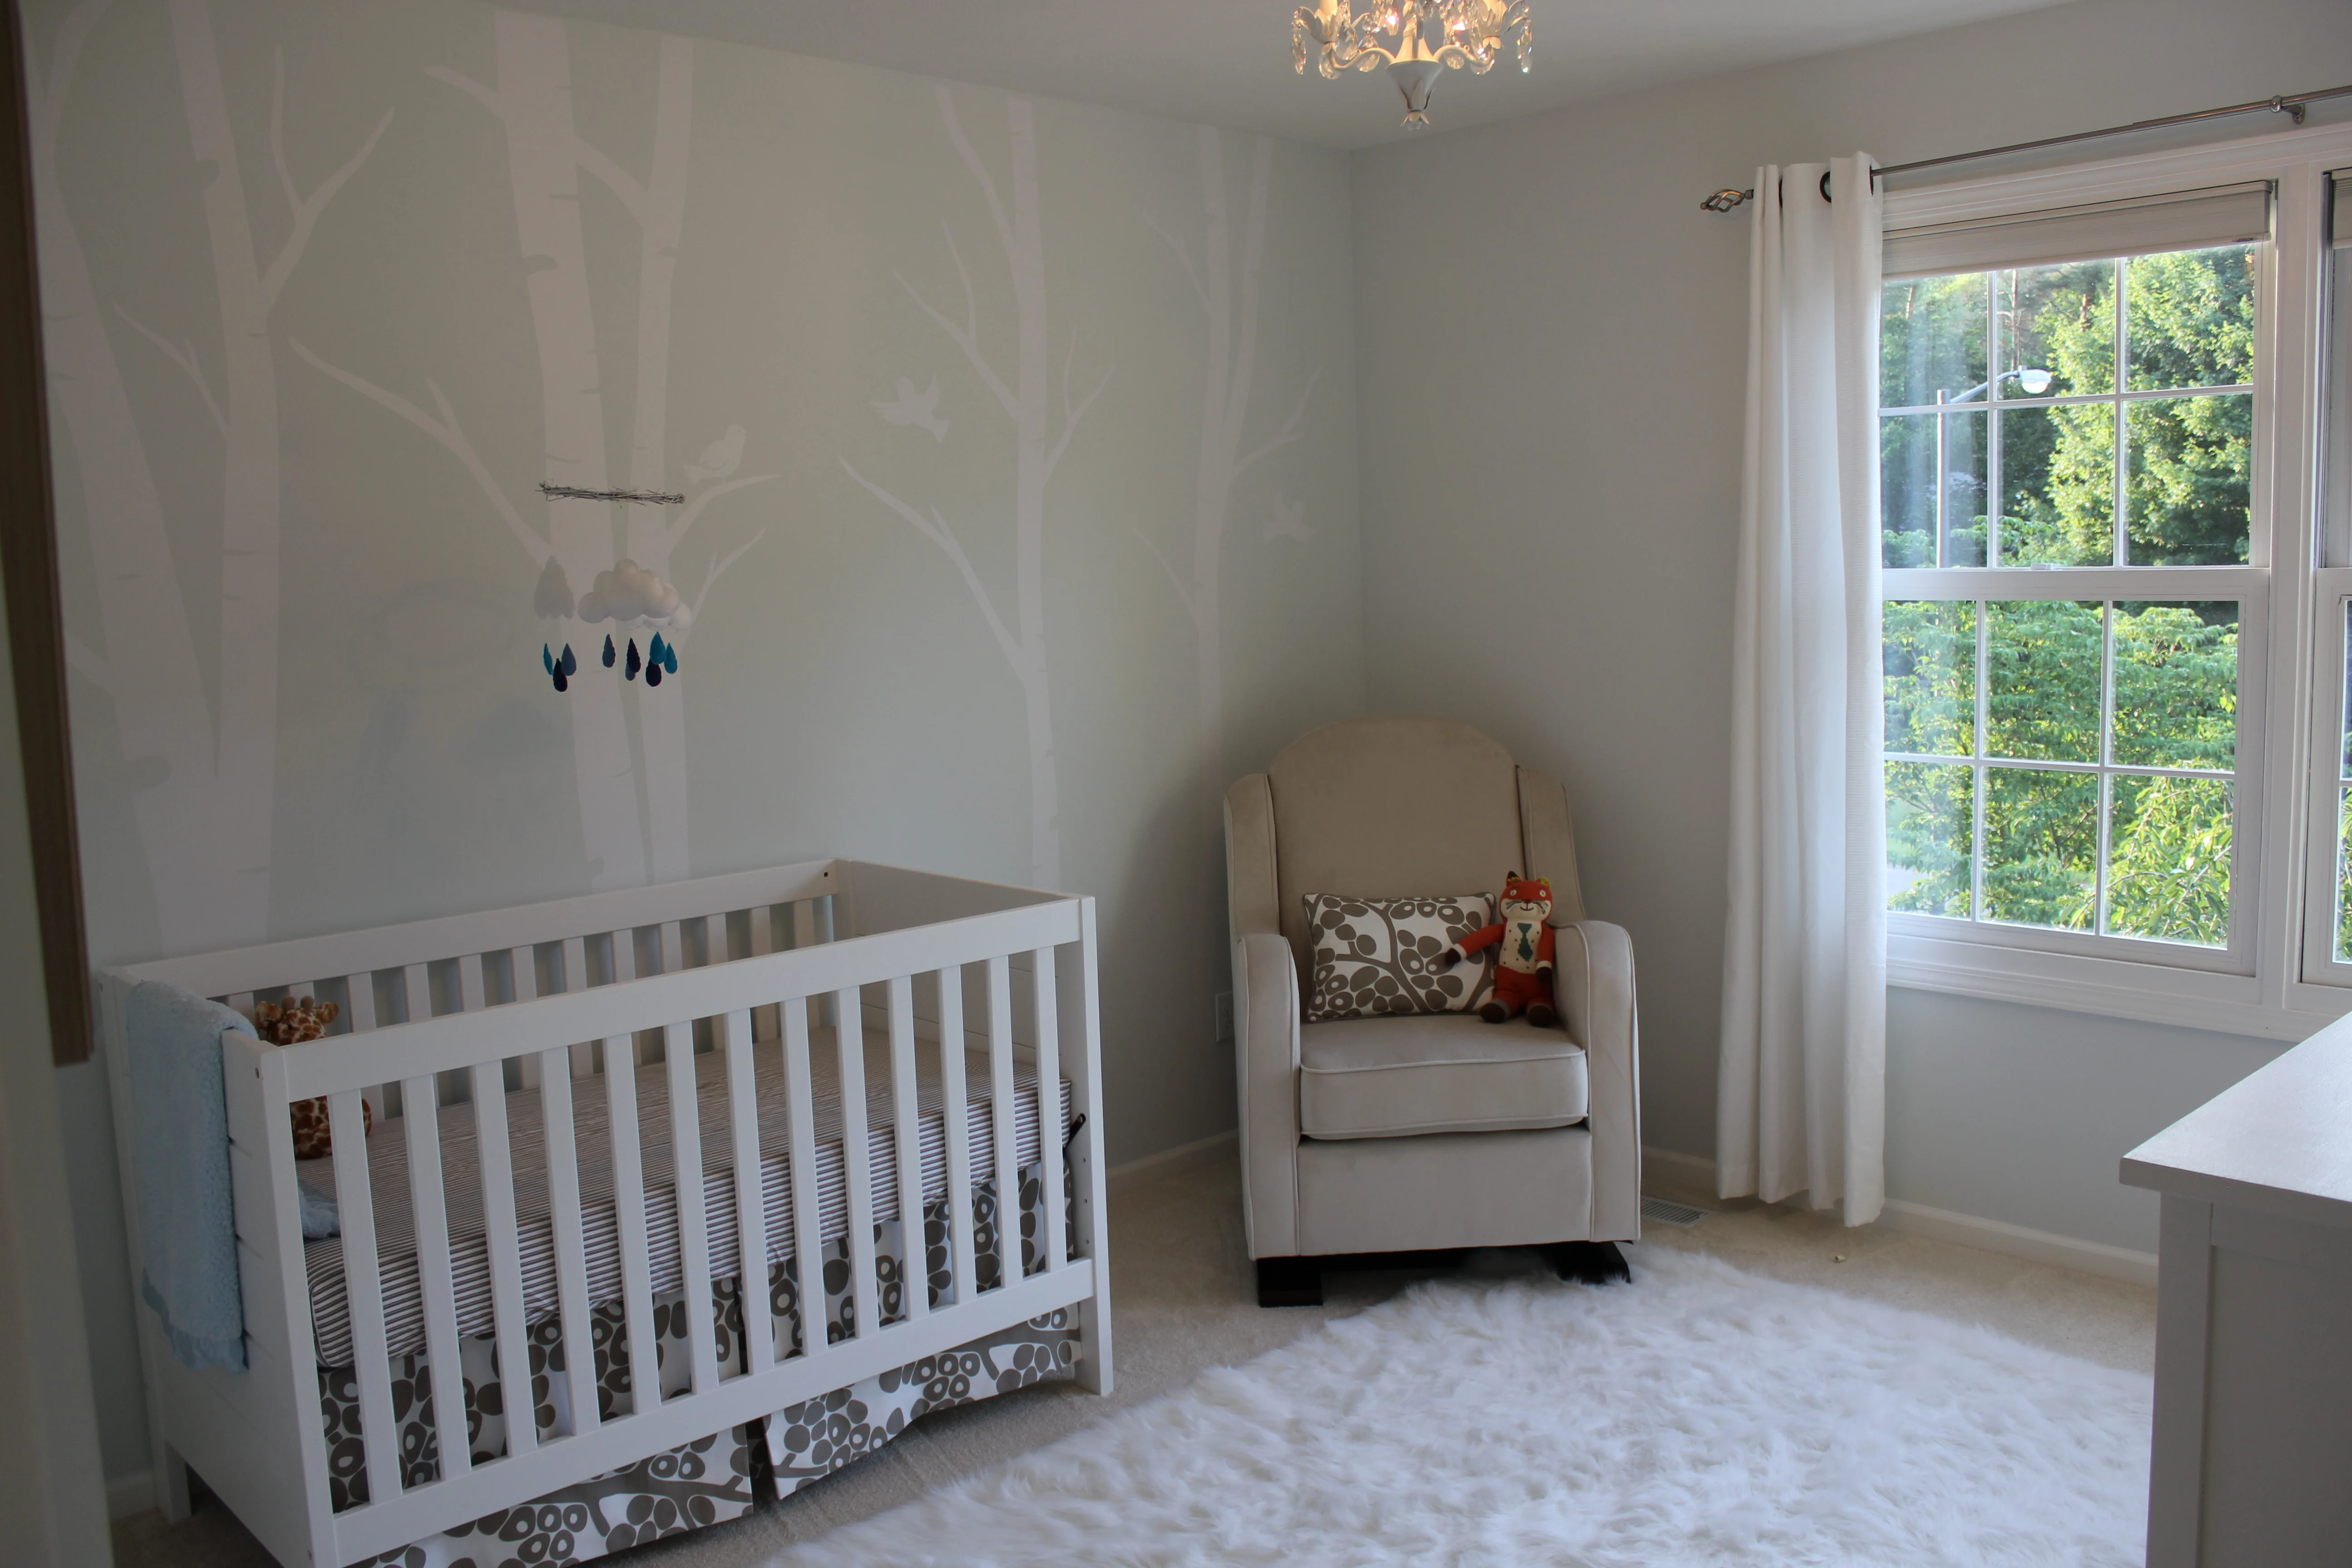 Birch Tree Decal Accent Wall